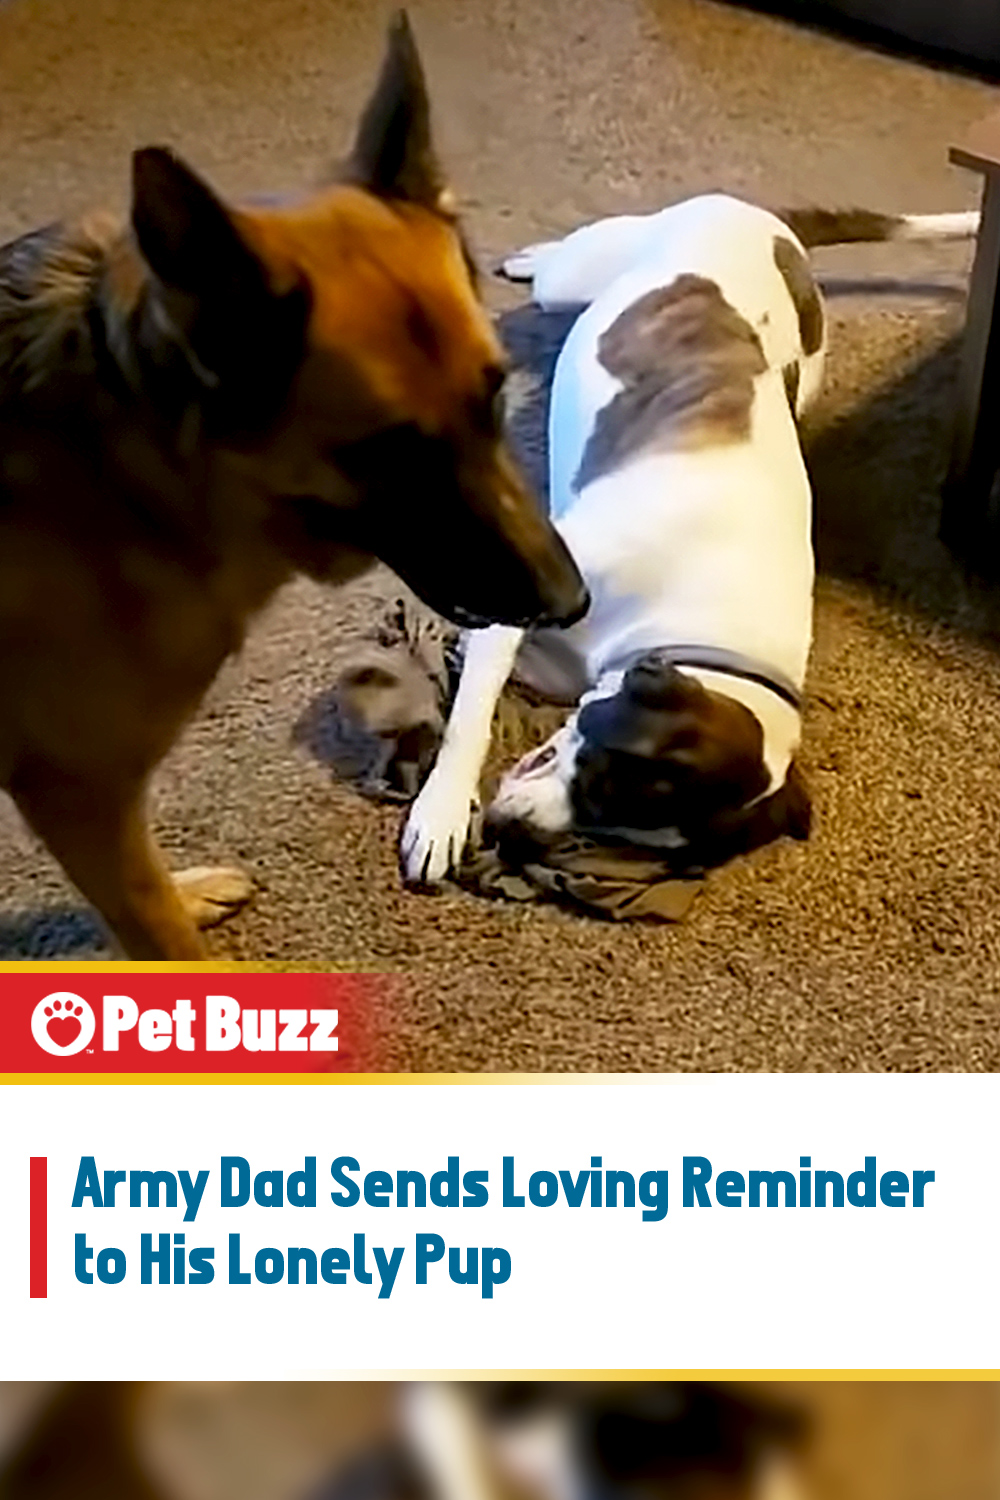 Army Dad Sends Loving Reminder to His Lonely Pup